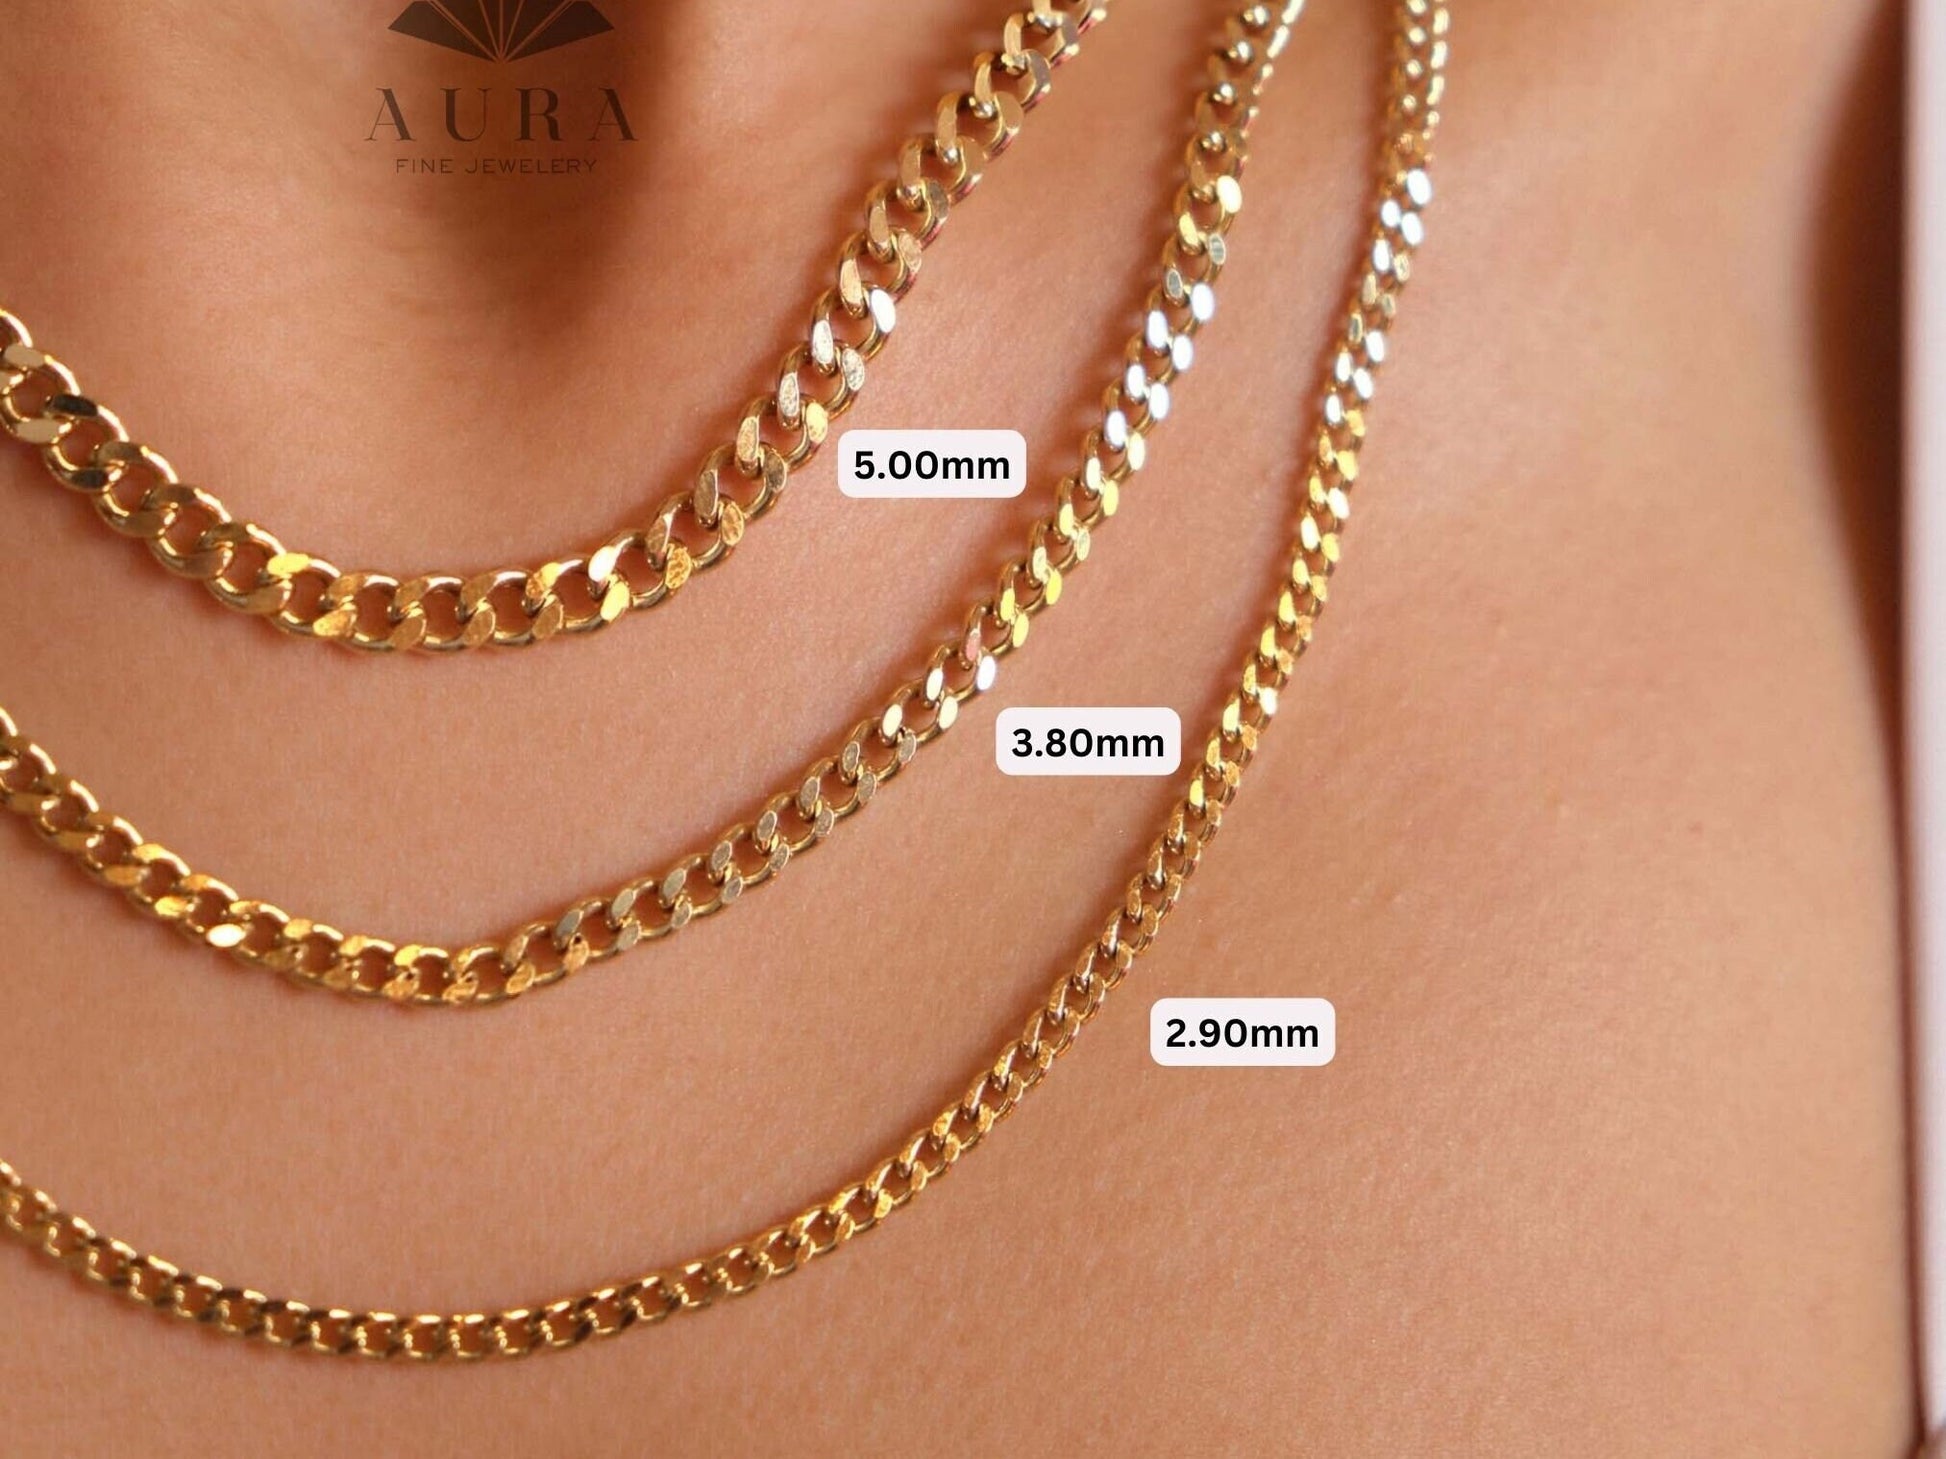 14K Gold Cuban Link Necklace, Cuban Link Chain Choker, 3mm 4mm 5mm Curb Link Necklace, Layering Gold Necklace, Men Women Necklace, Holiday